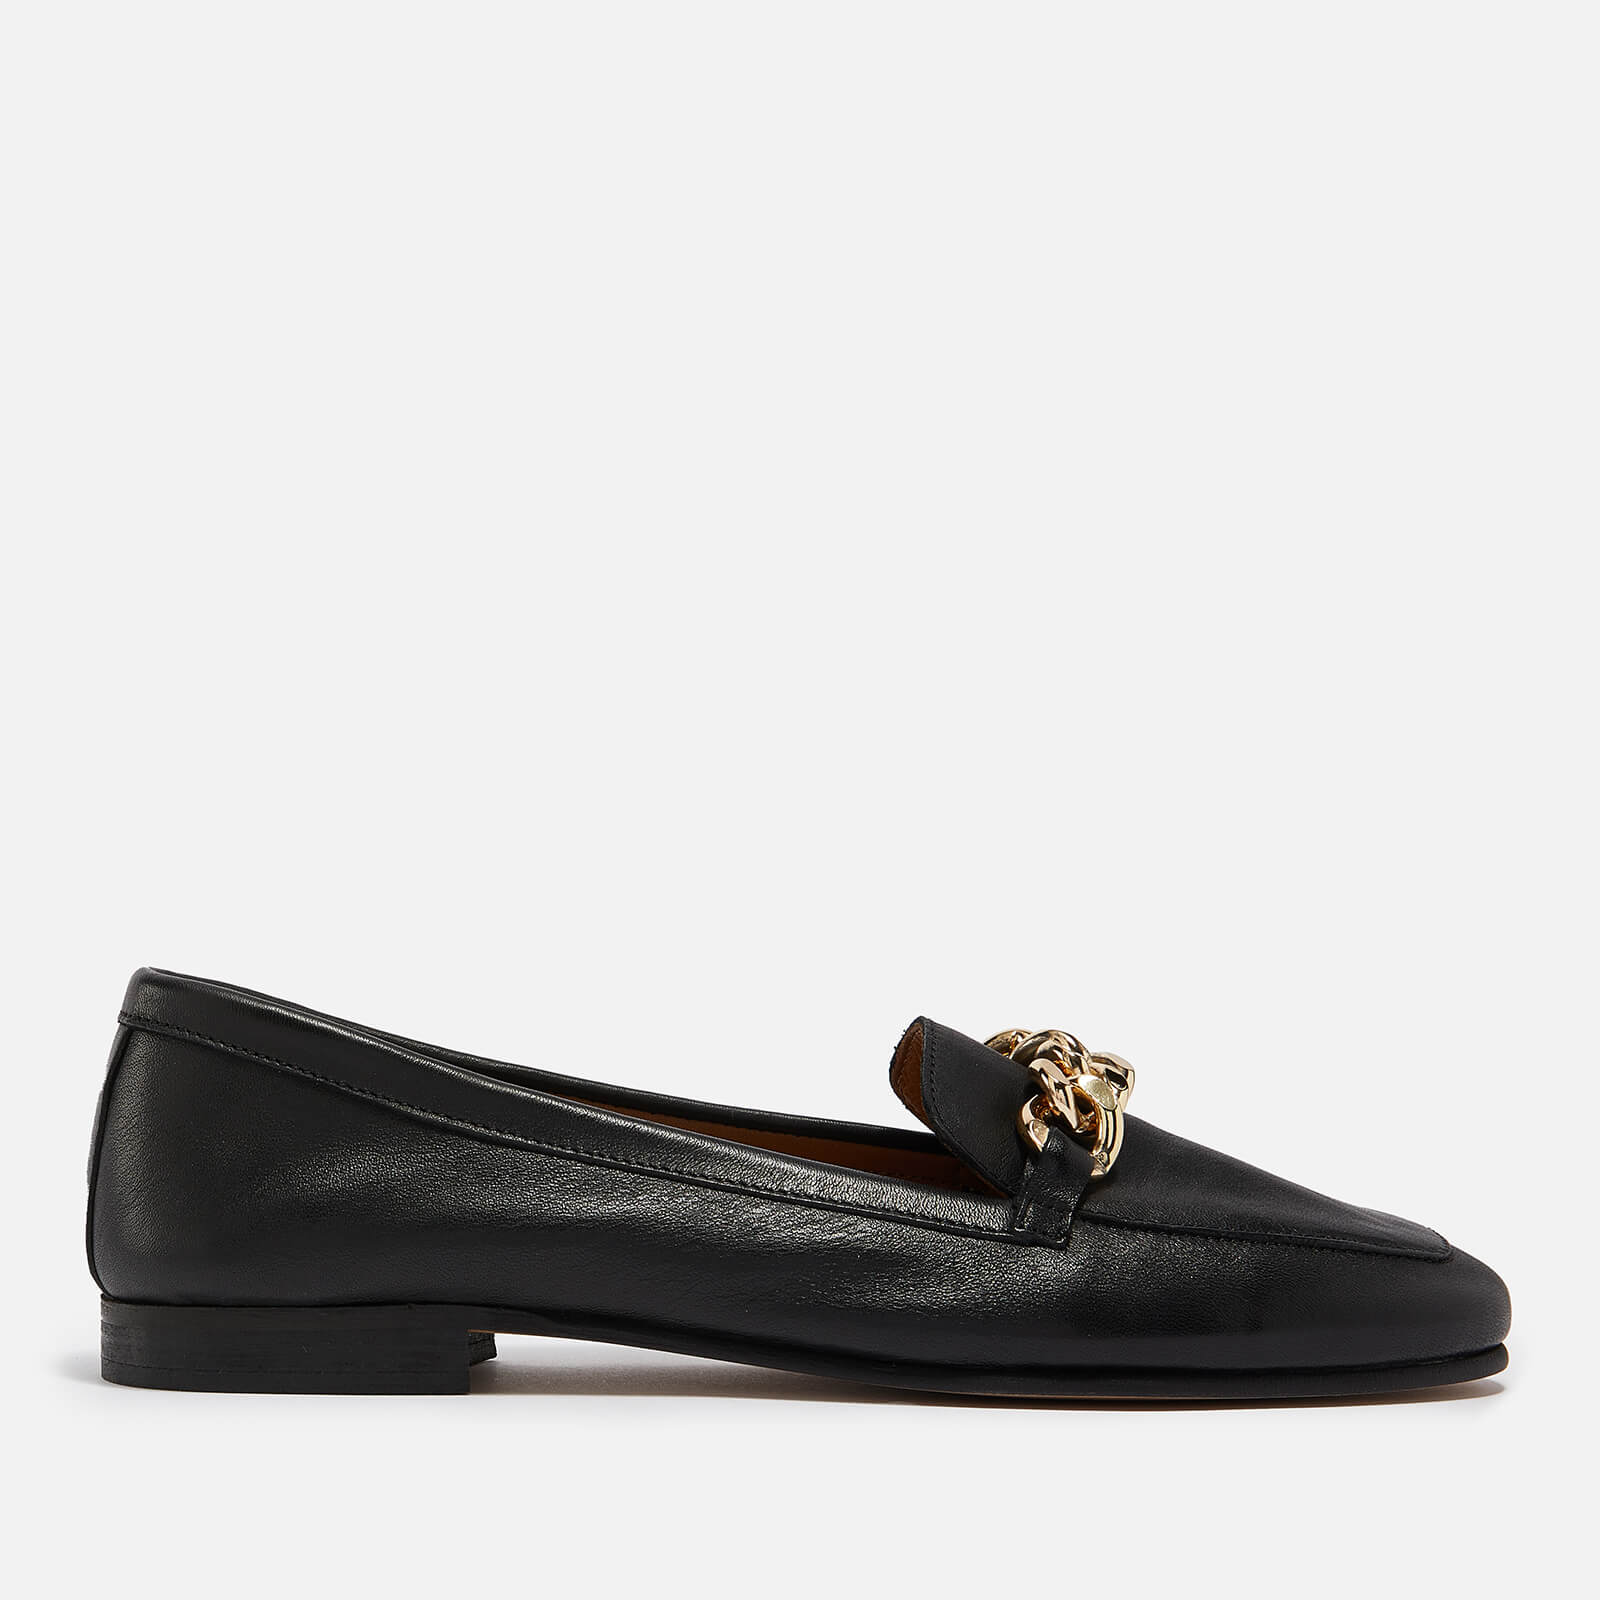 Dune Women’s Goldsmith Chain-Embellished Leather Loafers